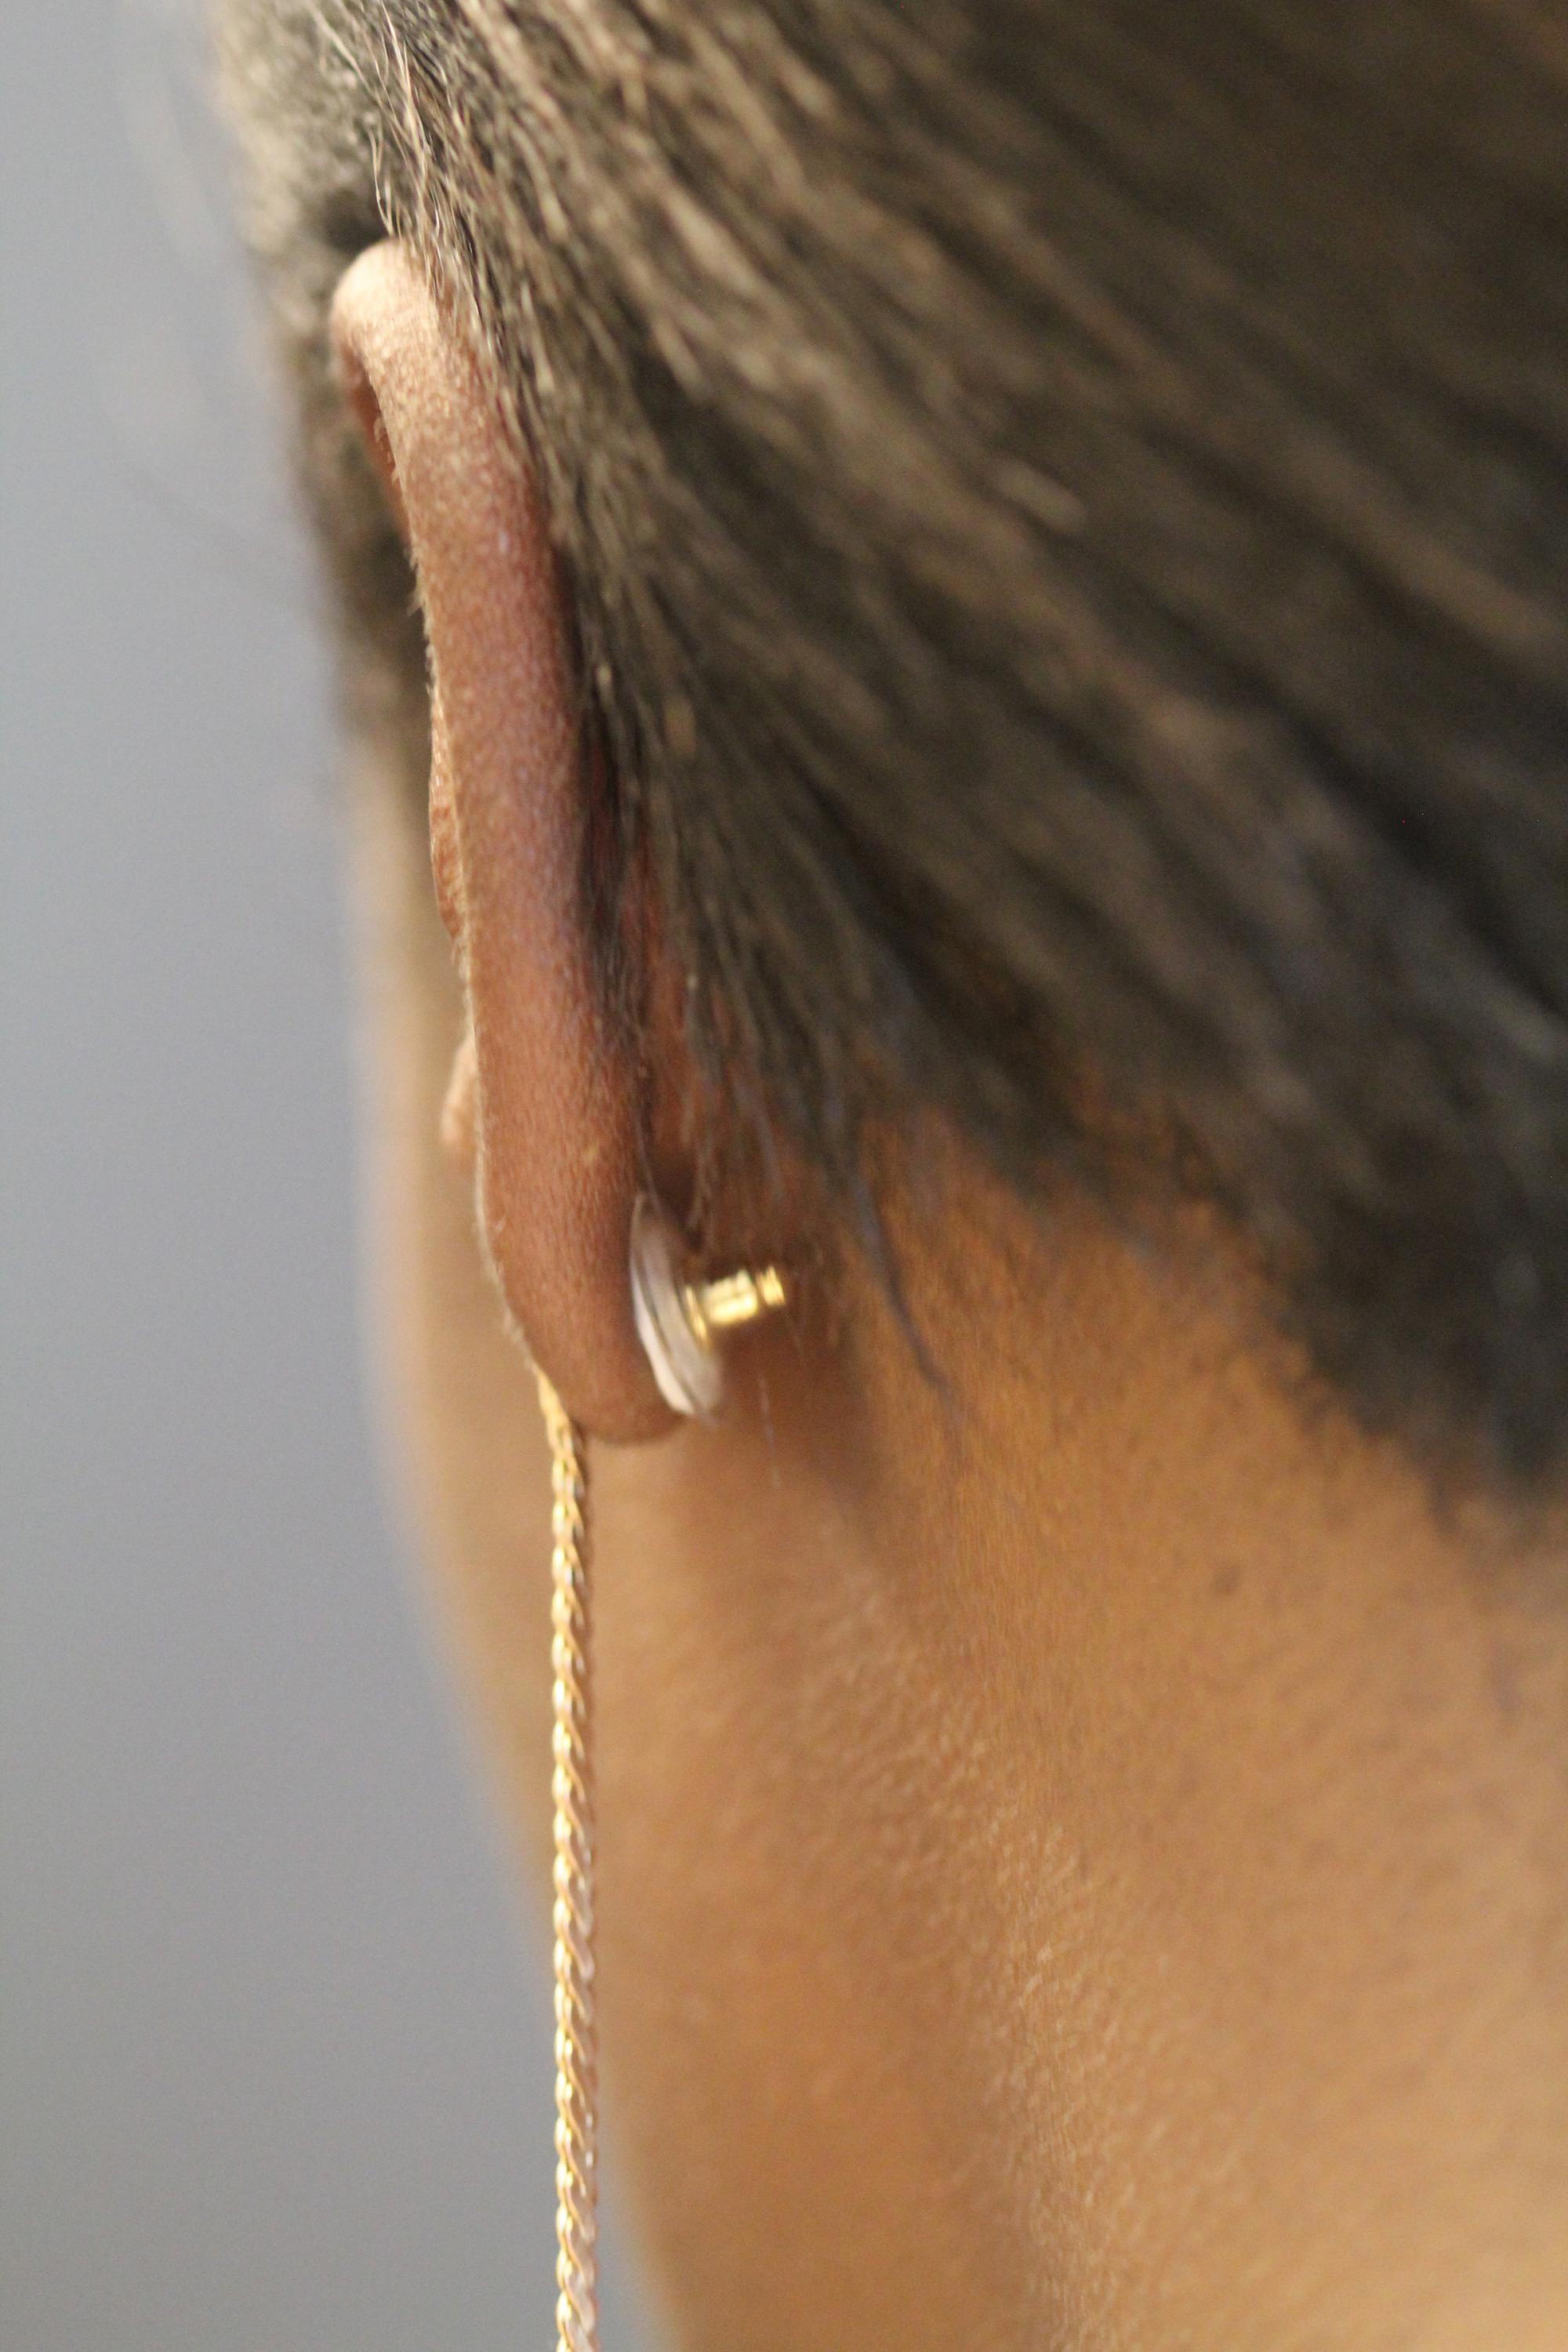 A contraceptive earring patch is shown as it would be worn on a woman’s ear. The white contraceptive patch can be seen attached to the earring back and adhered to the back of the ear. (Credit: Mark Prausnitz, Georgia Tech)